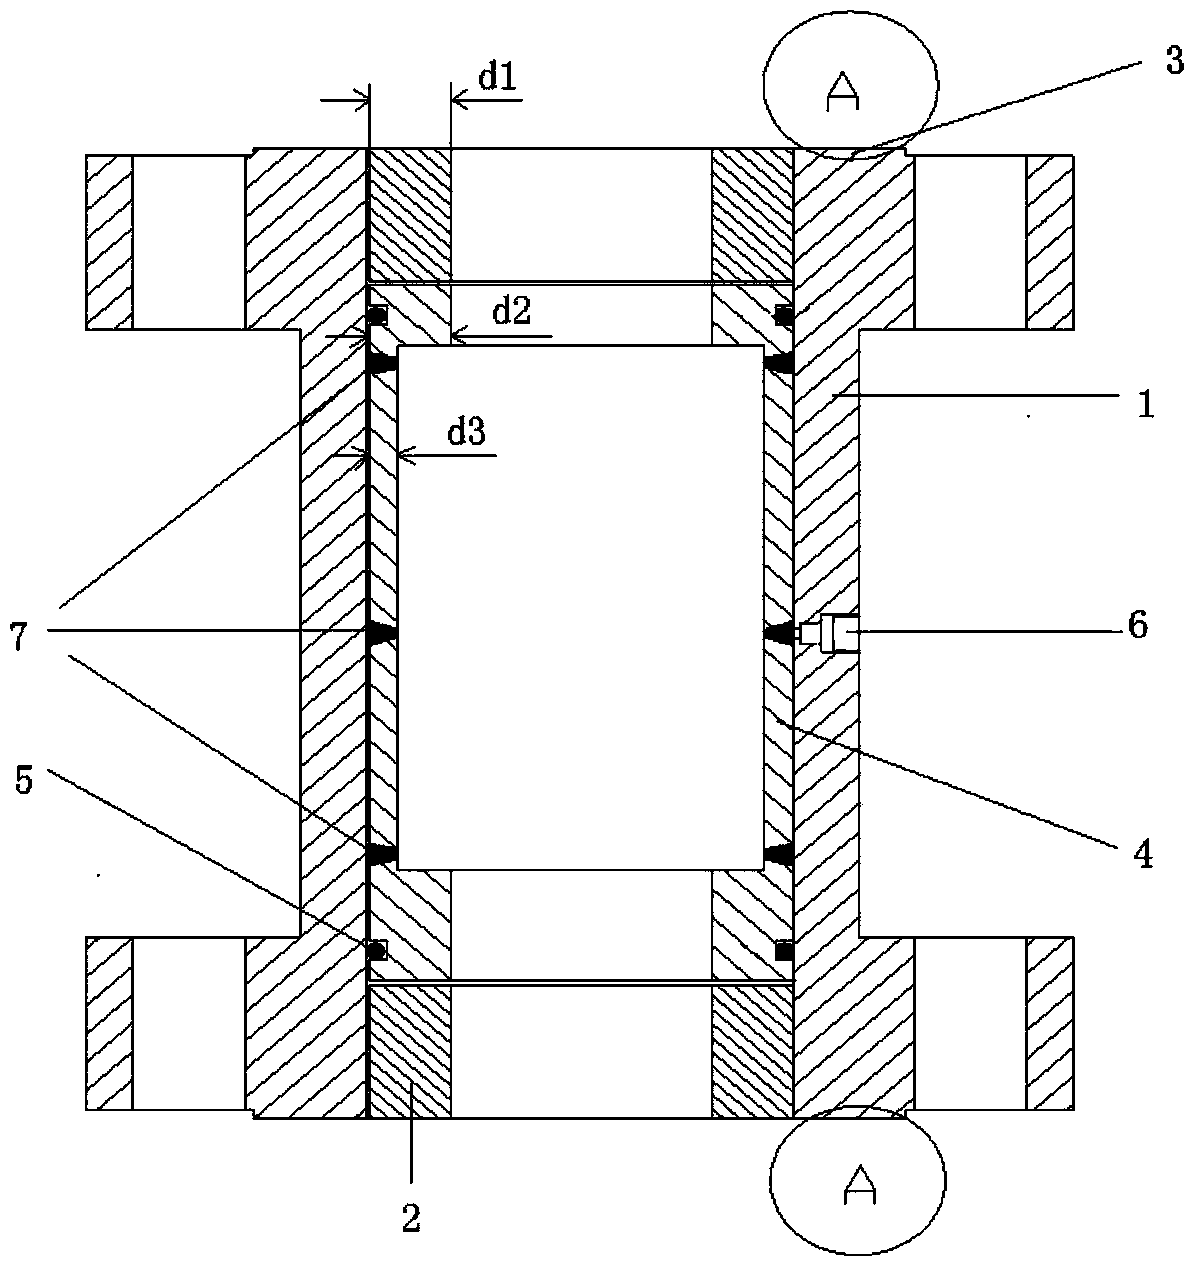 A device and method for evaluating the corrosion resistance of metal composite pipes